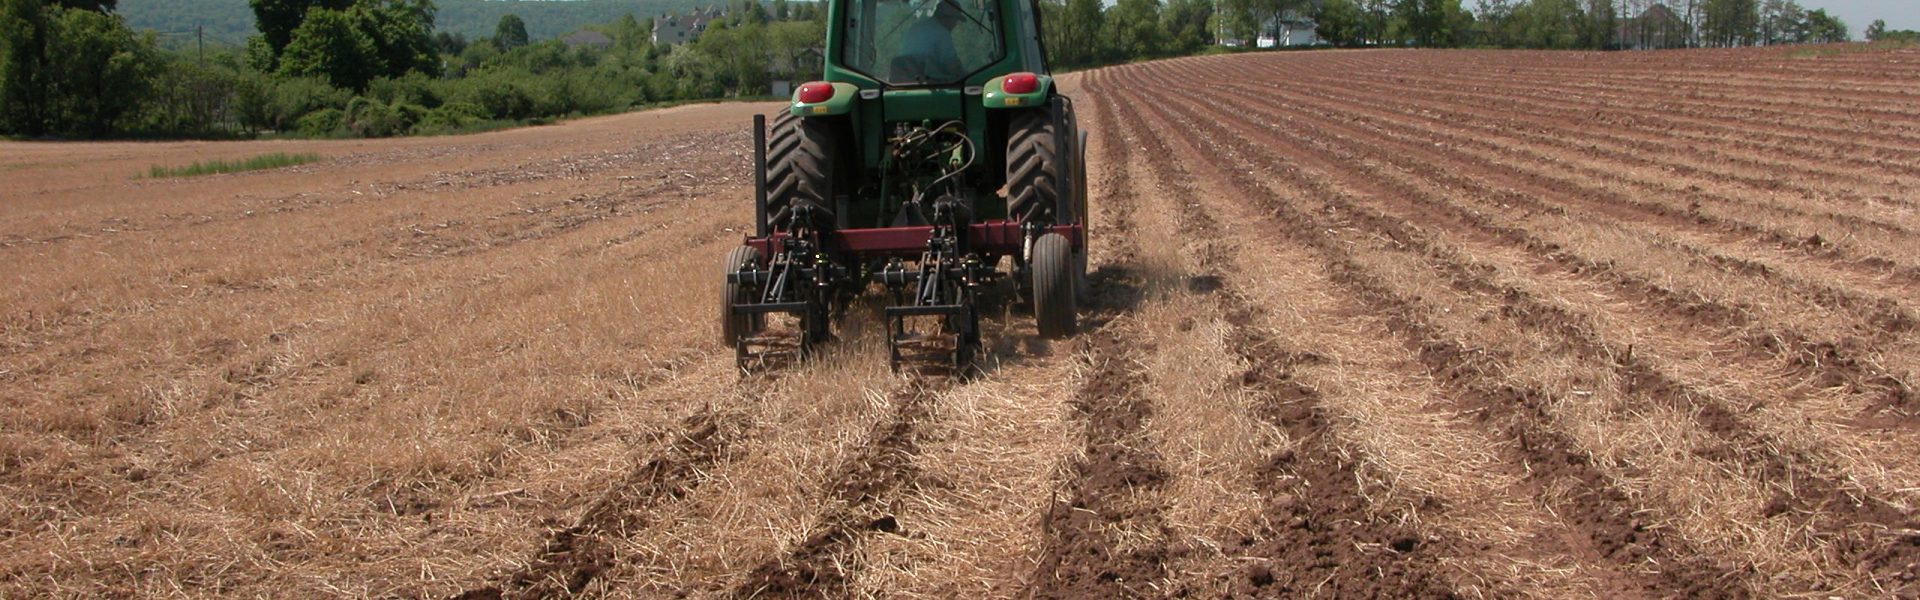 tractor with deep zone tillage machine in a field in Connecticut